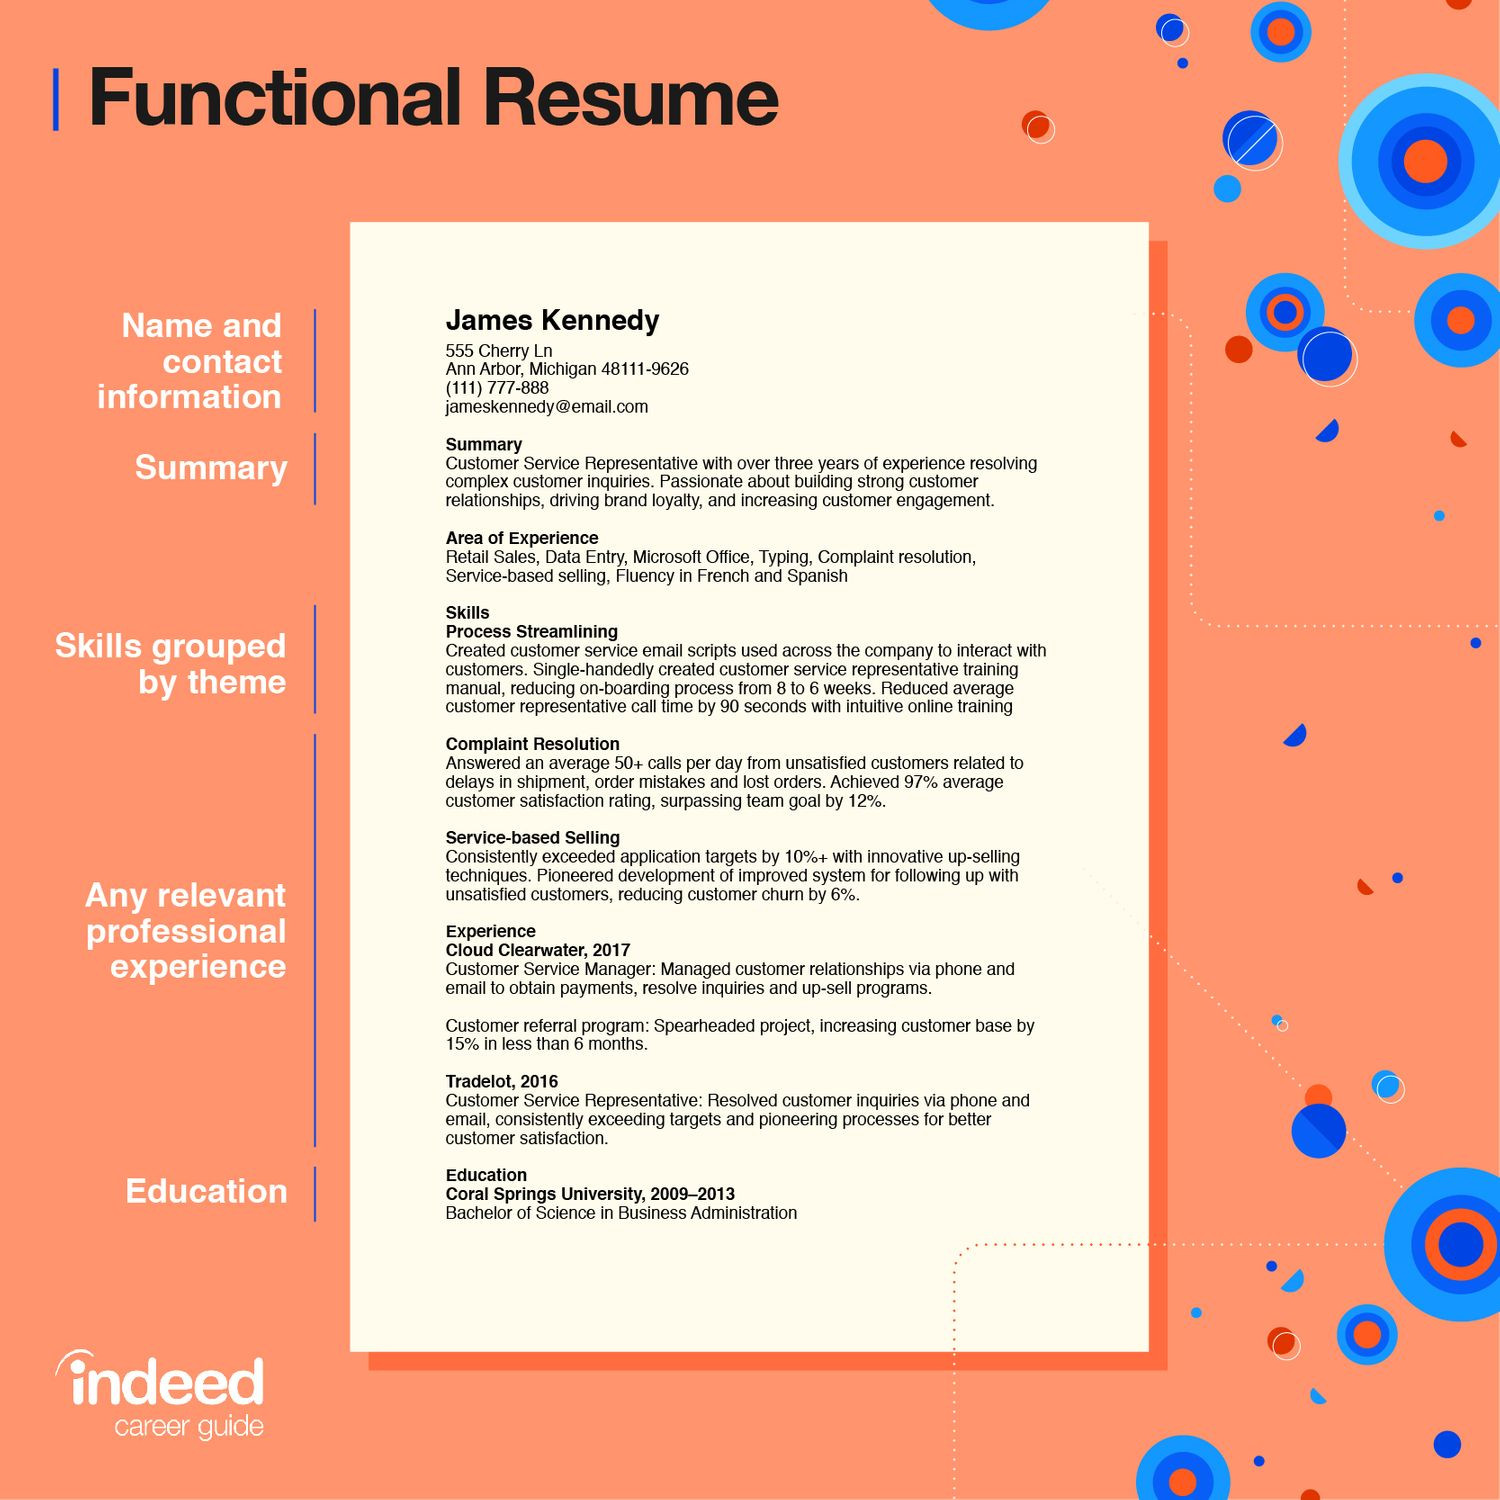 Indeed Sample Resume for Industrial Engineer 12 Essential Engineering Skills for Your Resume Indeed.com